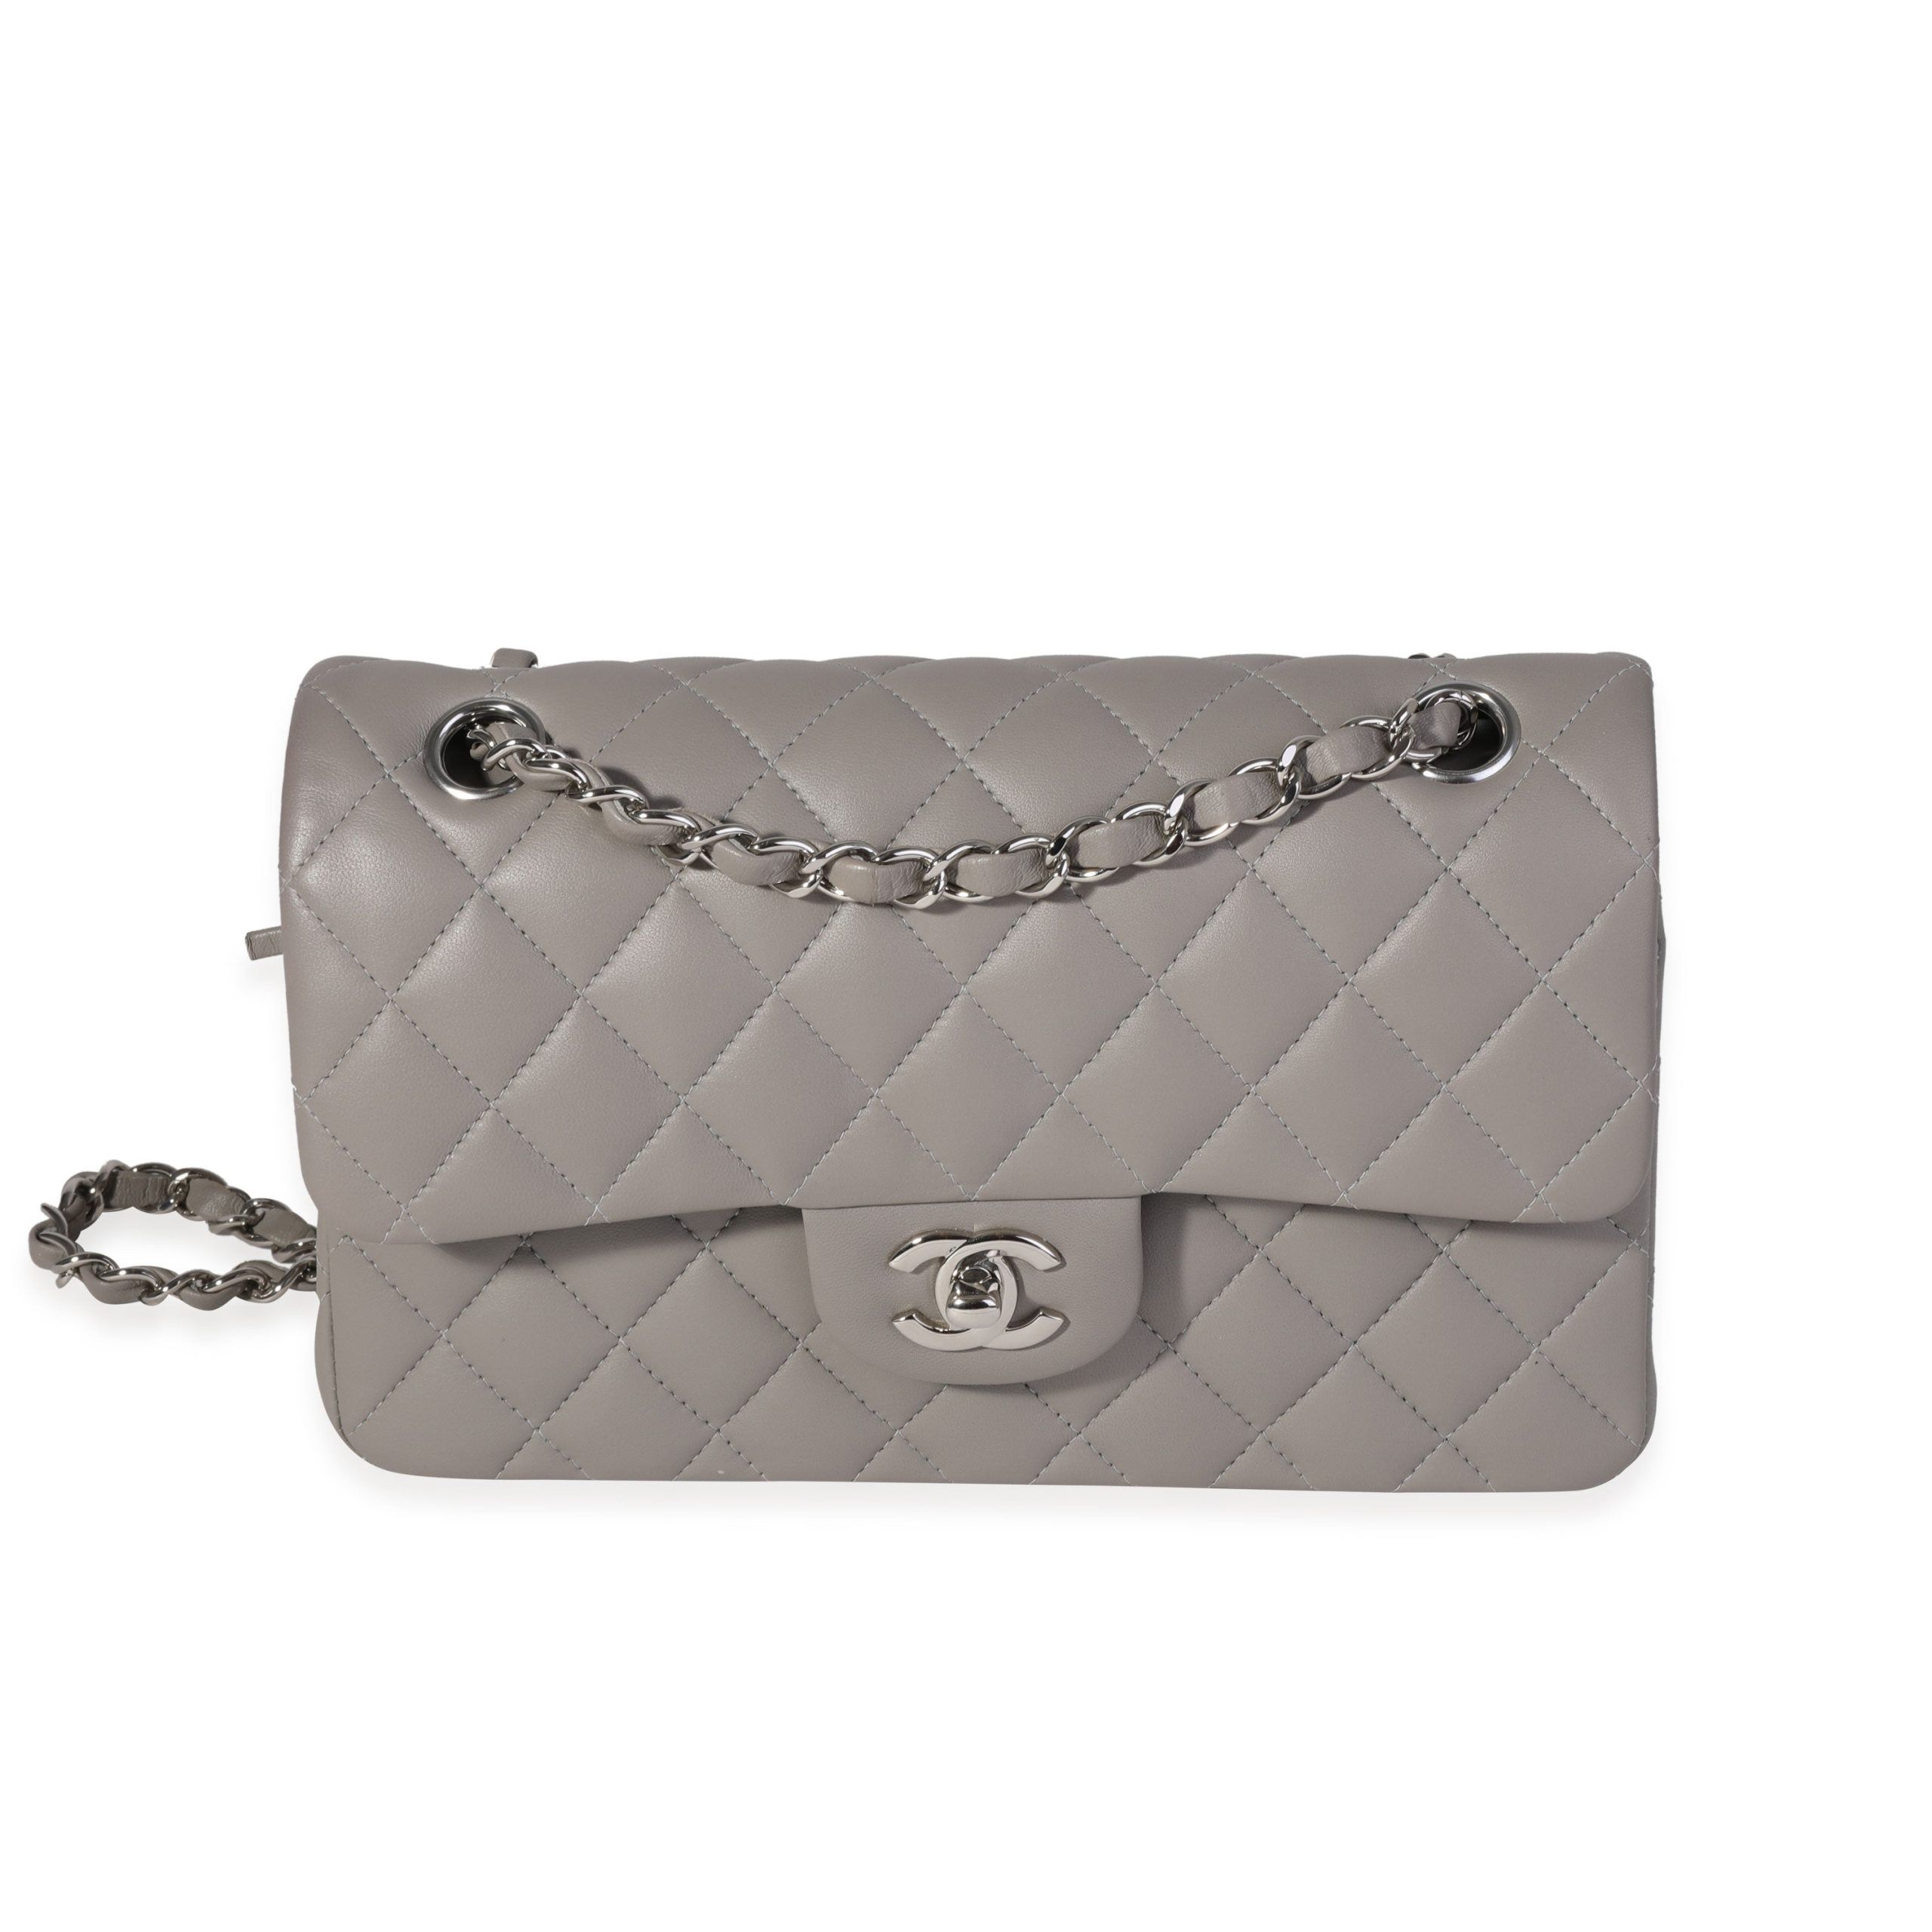 Chanel Chanel Grey Quilted Lambskin Small Classic Double Flap Bag Size ONE SIZE - 1 Preview